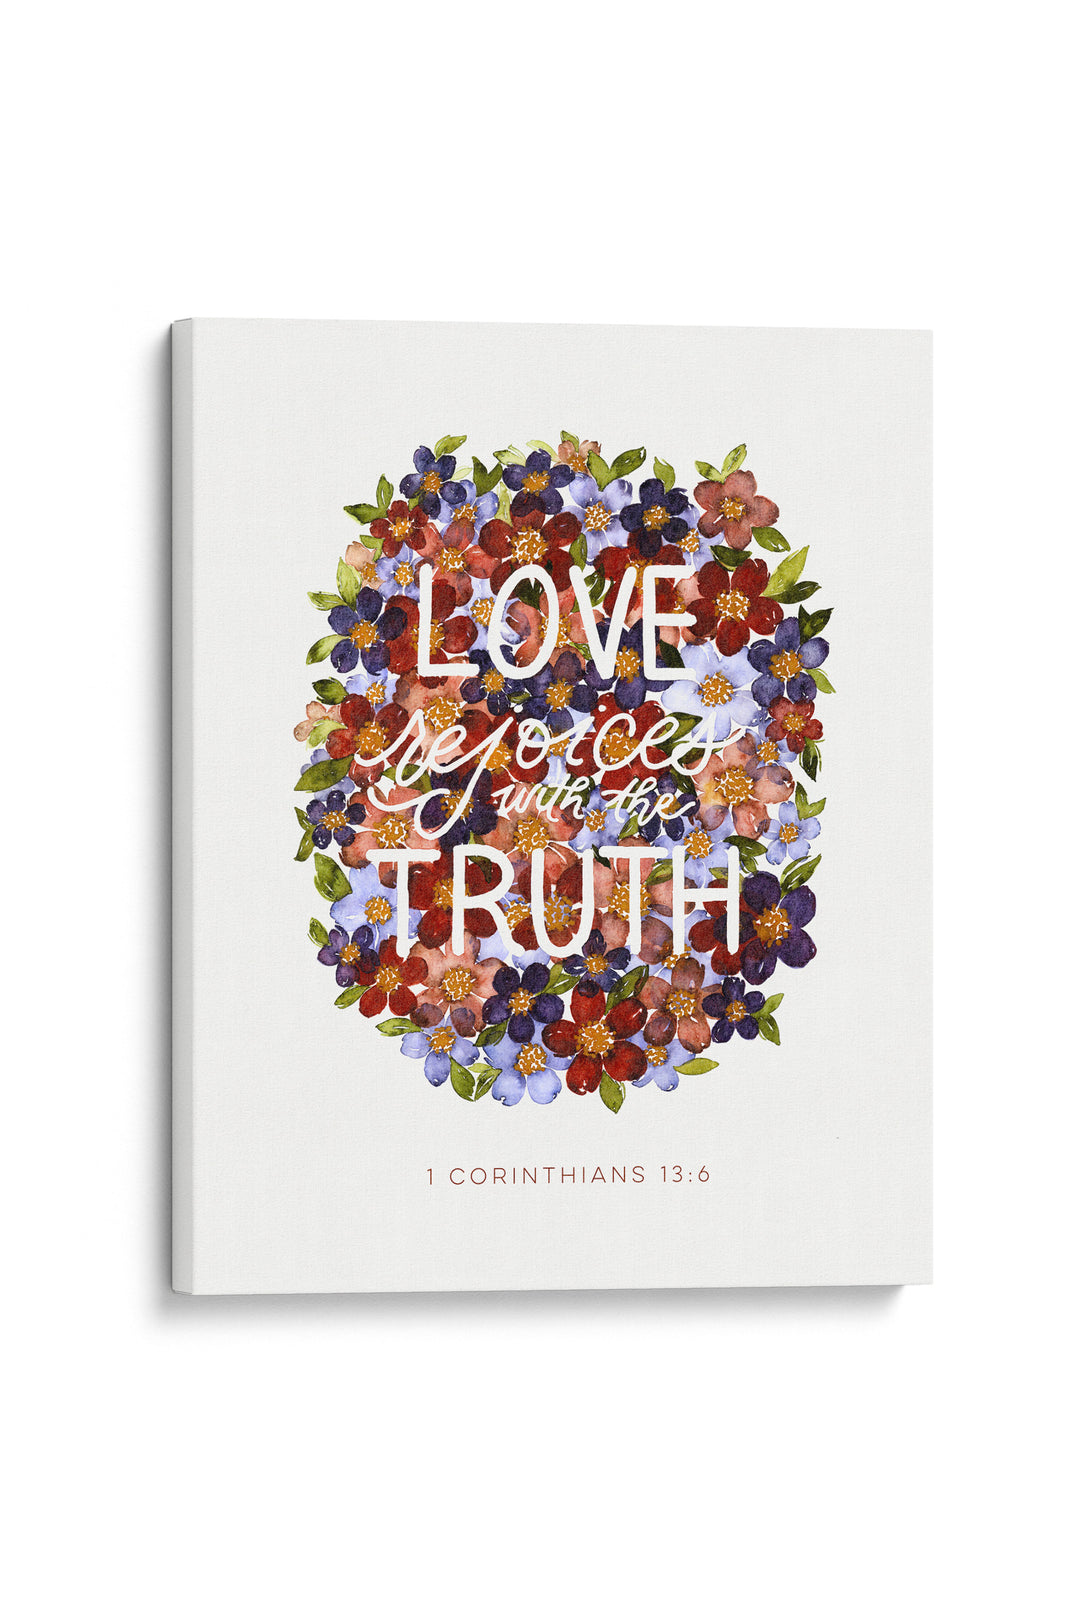 “Love Rejoices with the Truth”